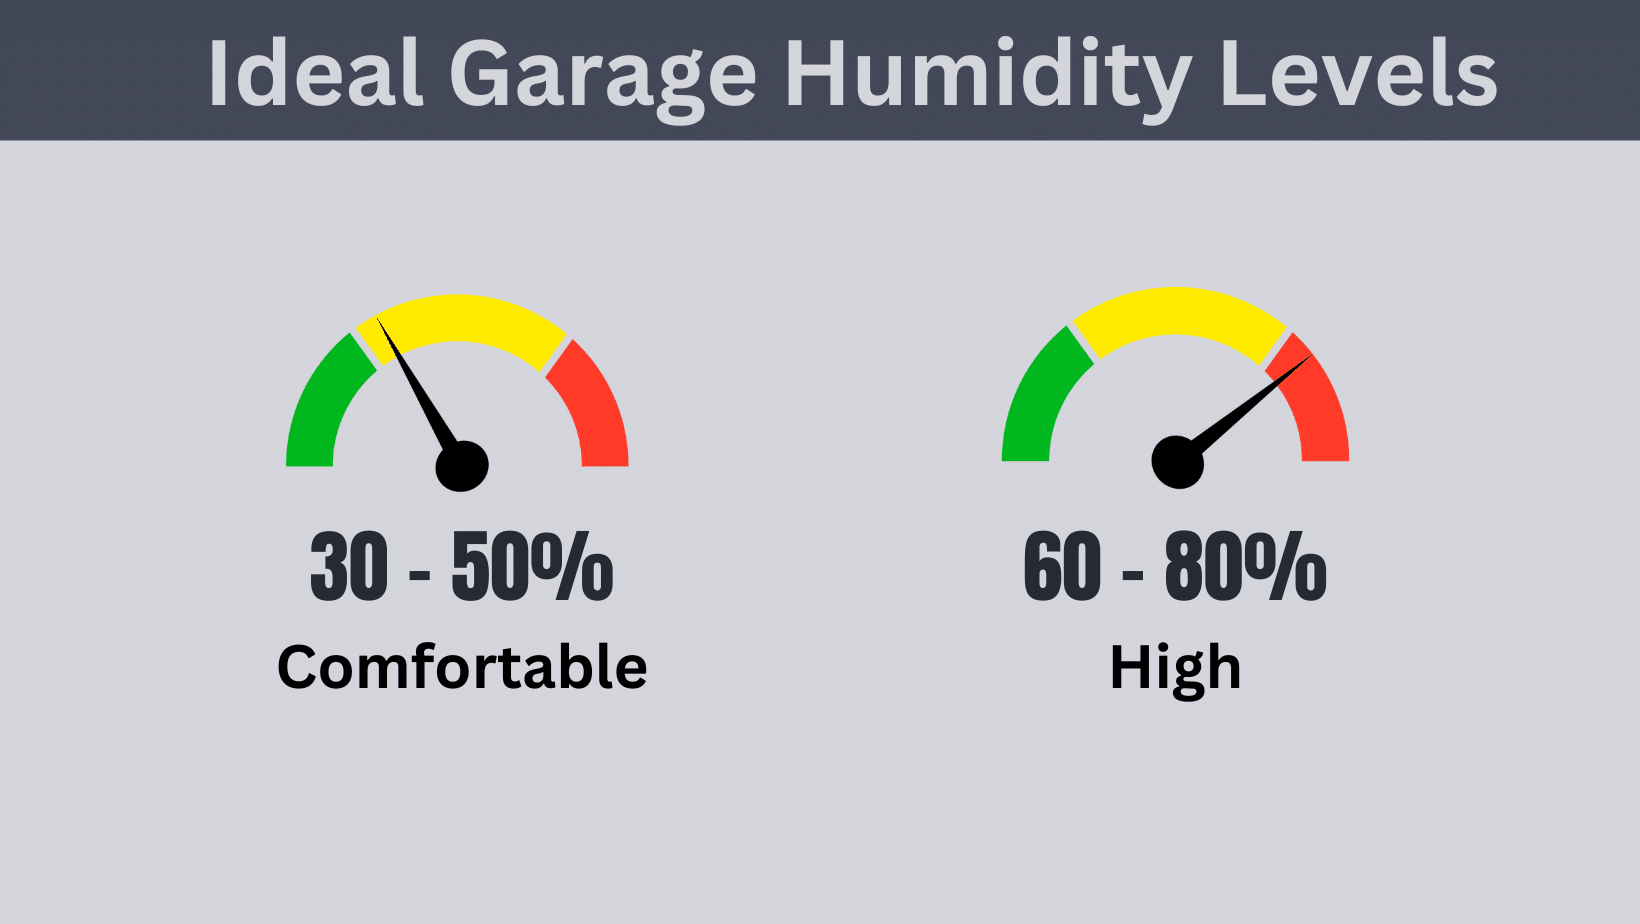 Ideal garage humidity levels range between 30% and 50%